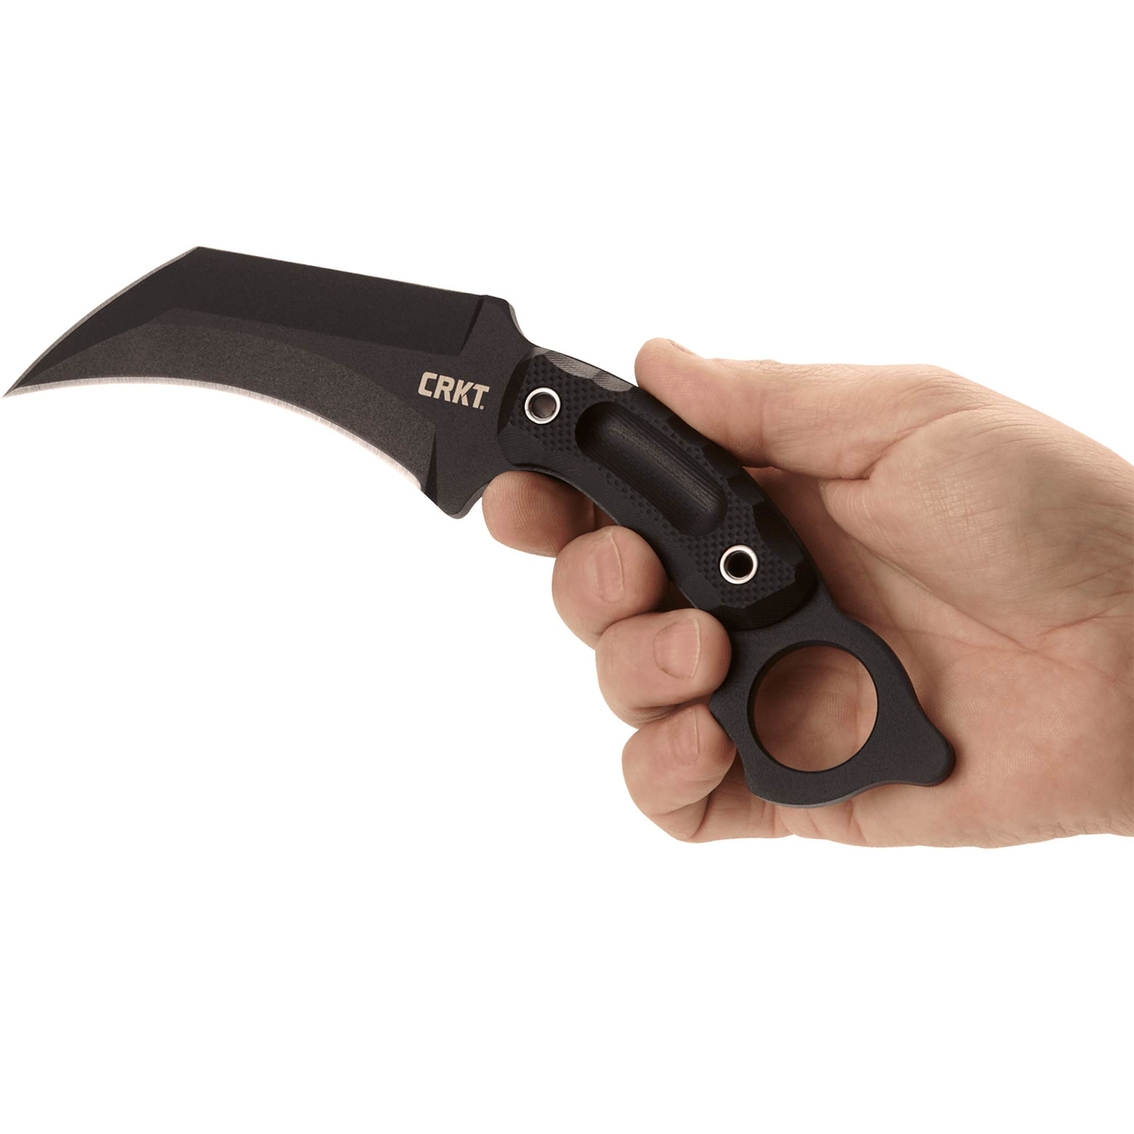 Columbia River Knife and Tool Du Hoc Karambit Fixed Blade Knife - Image 5 of 6